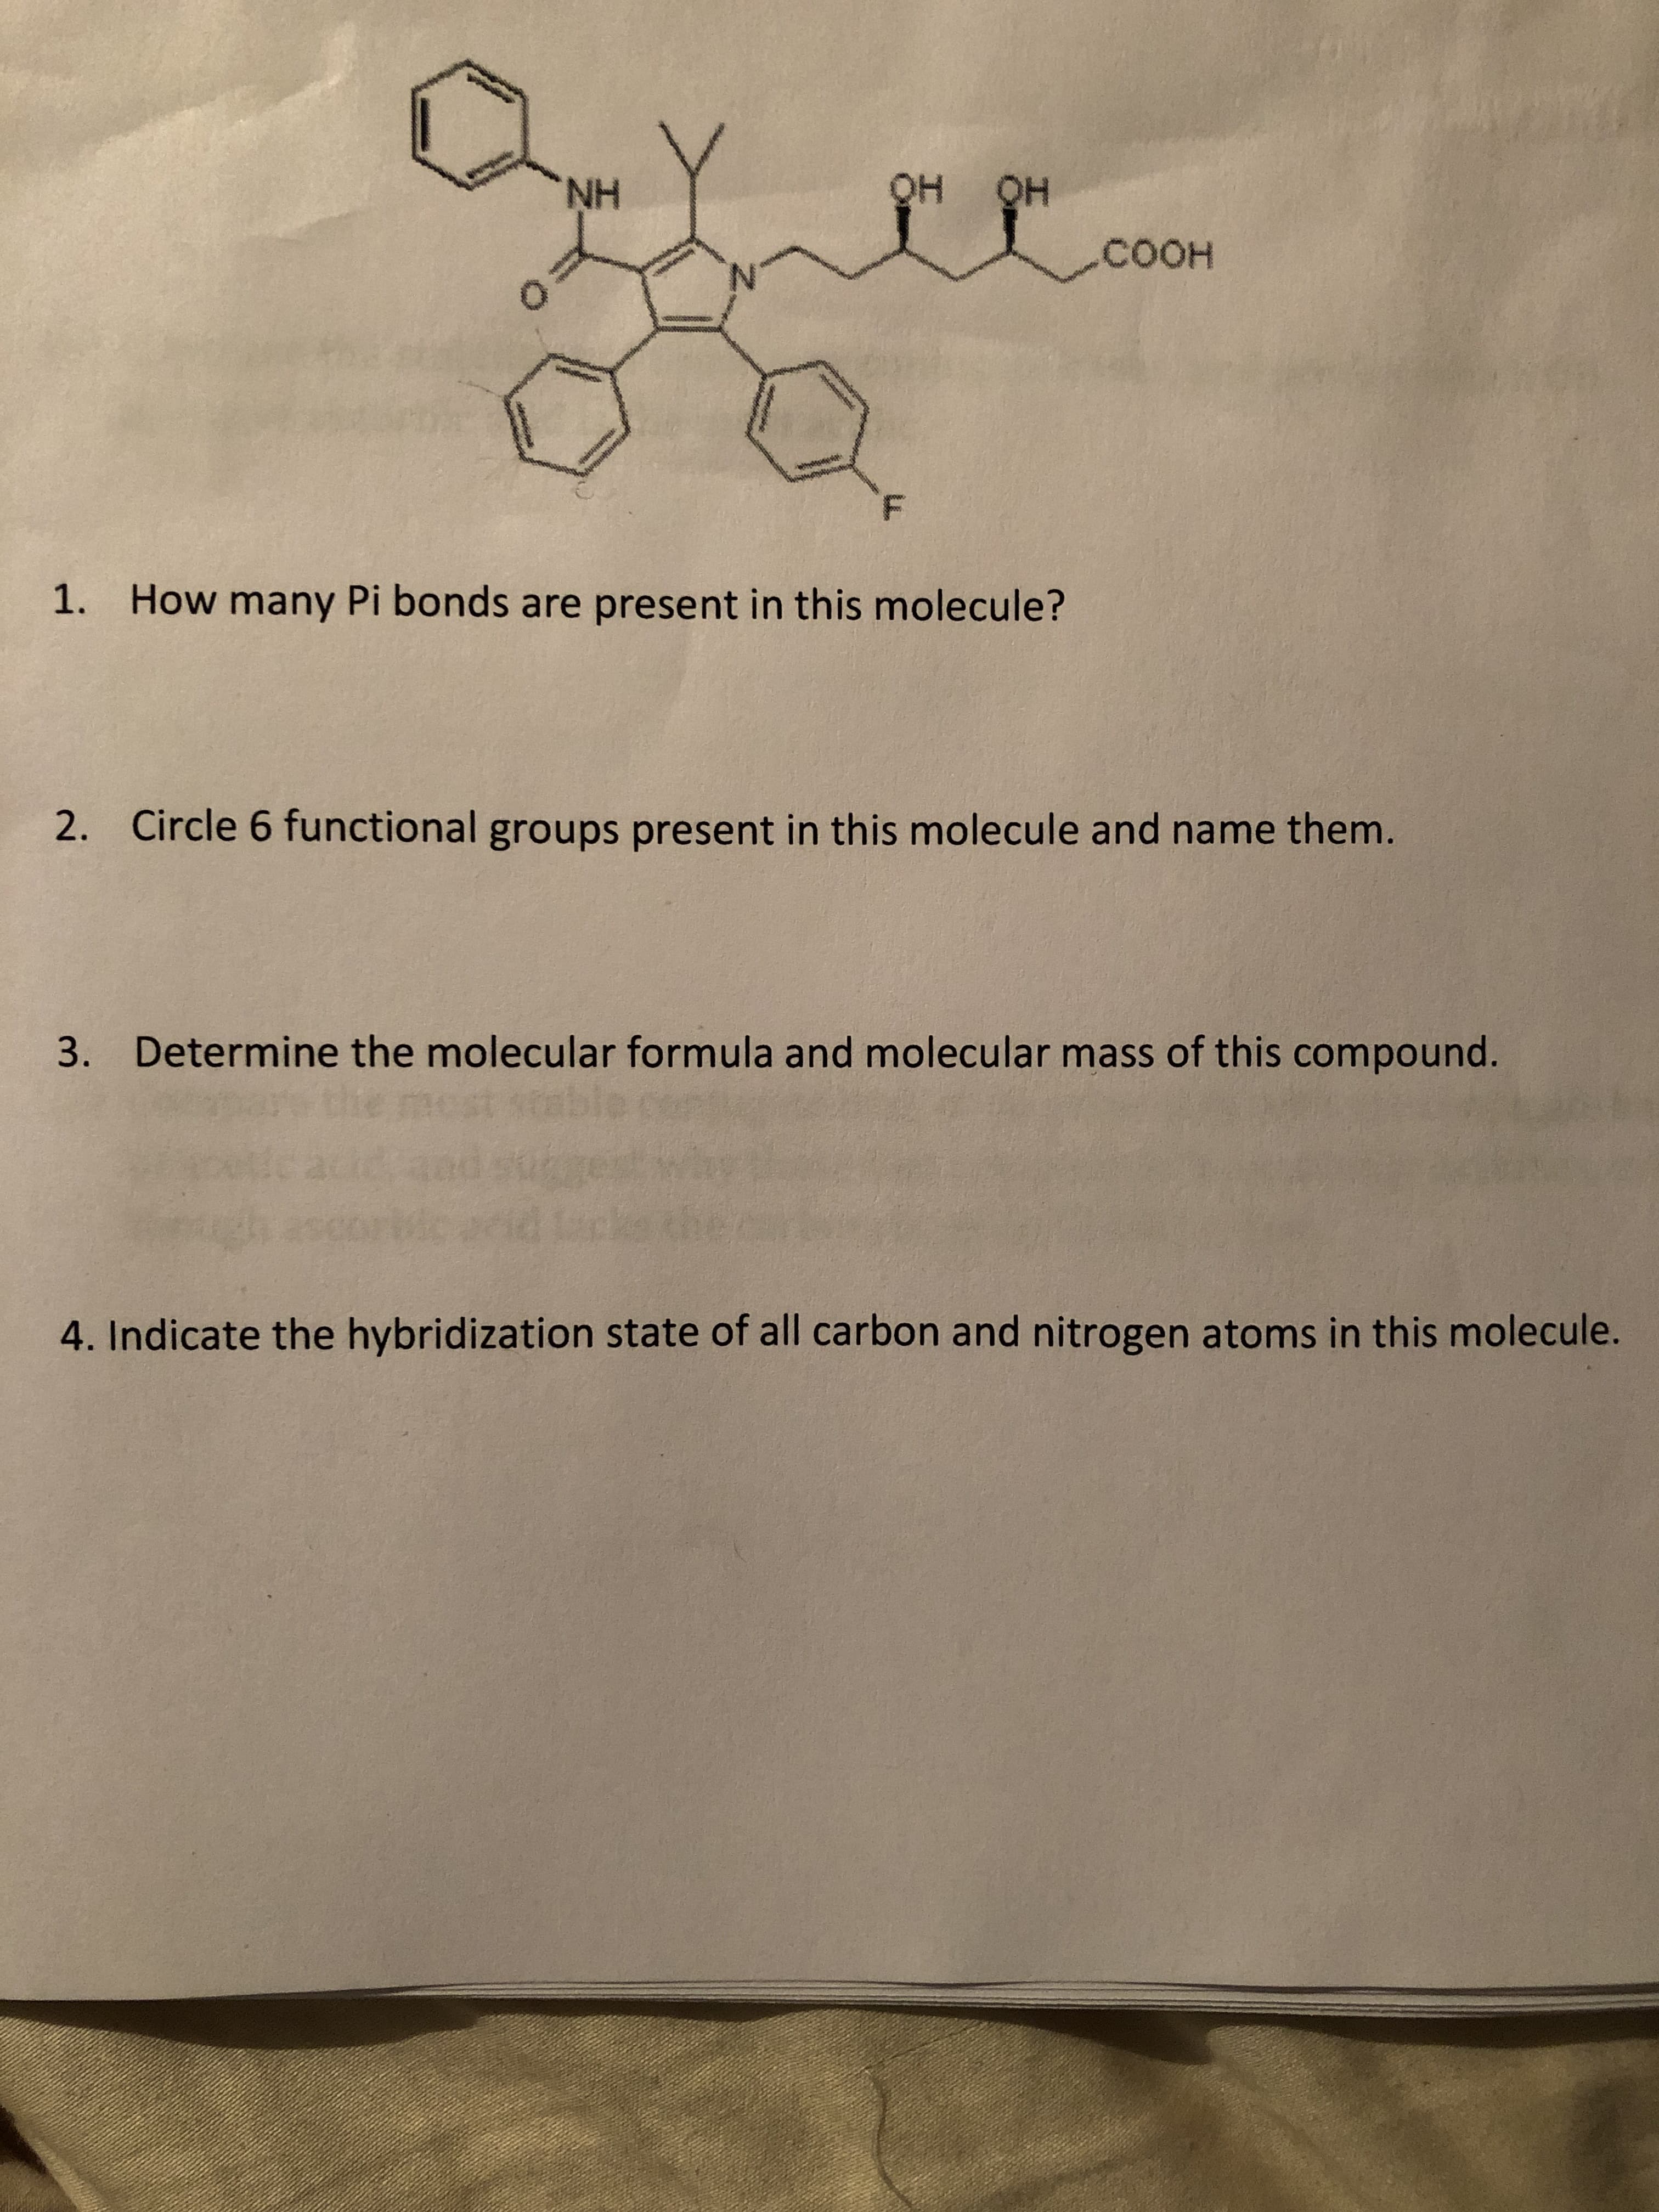 NH
соон
1.
How many Pi bonds are present in this molecule?
2.
Circle 6 functional groups present in this molecule and name them.
3.
Determine the molecular formula and molecular mass of this compound.
4. Indicate the hybridization state of all carbon and nitrogen atoms in this molecule.
